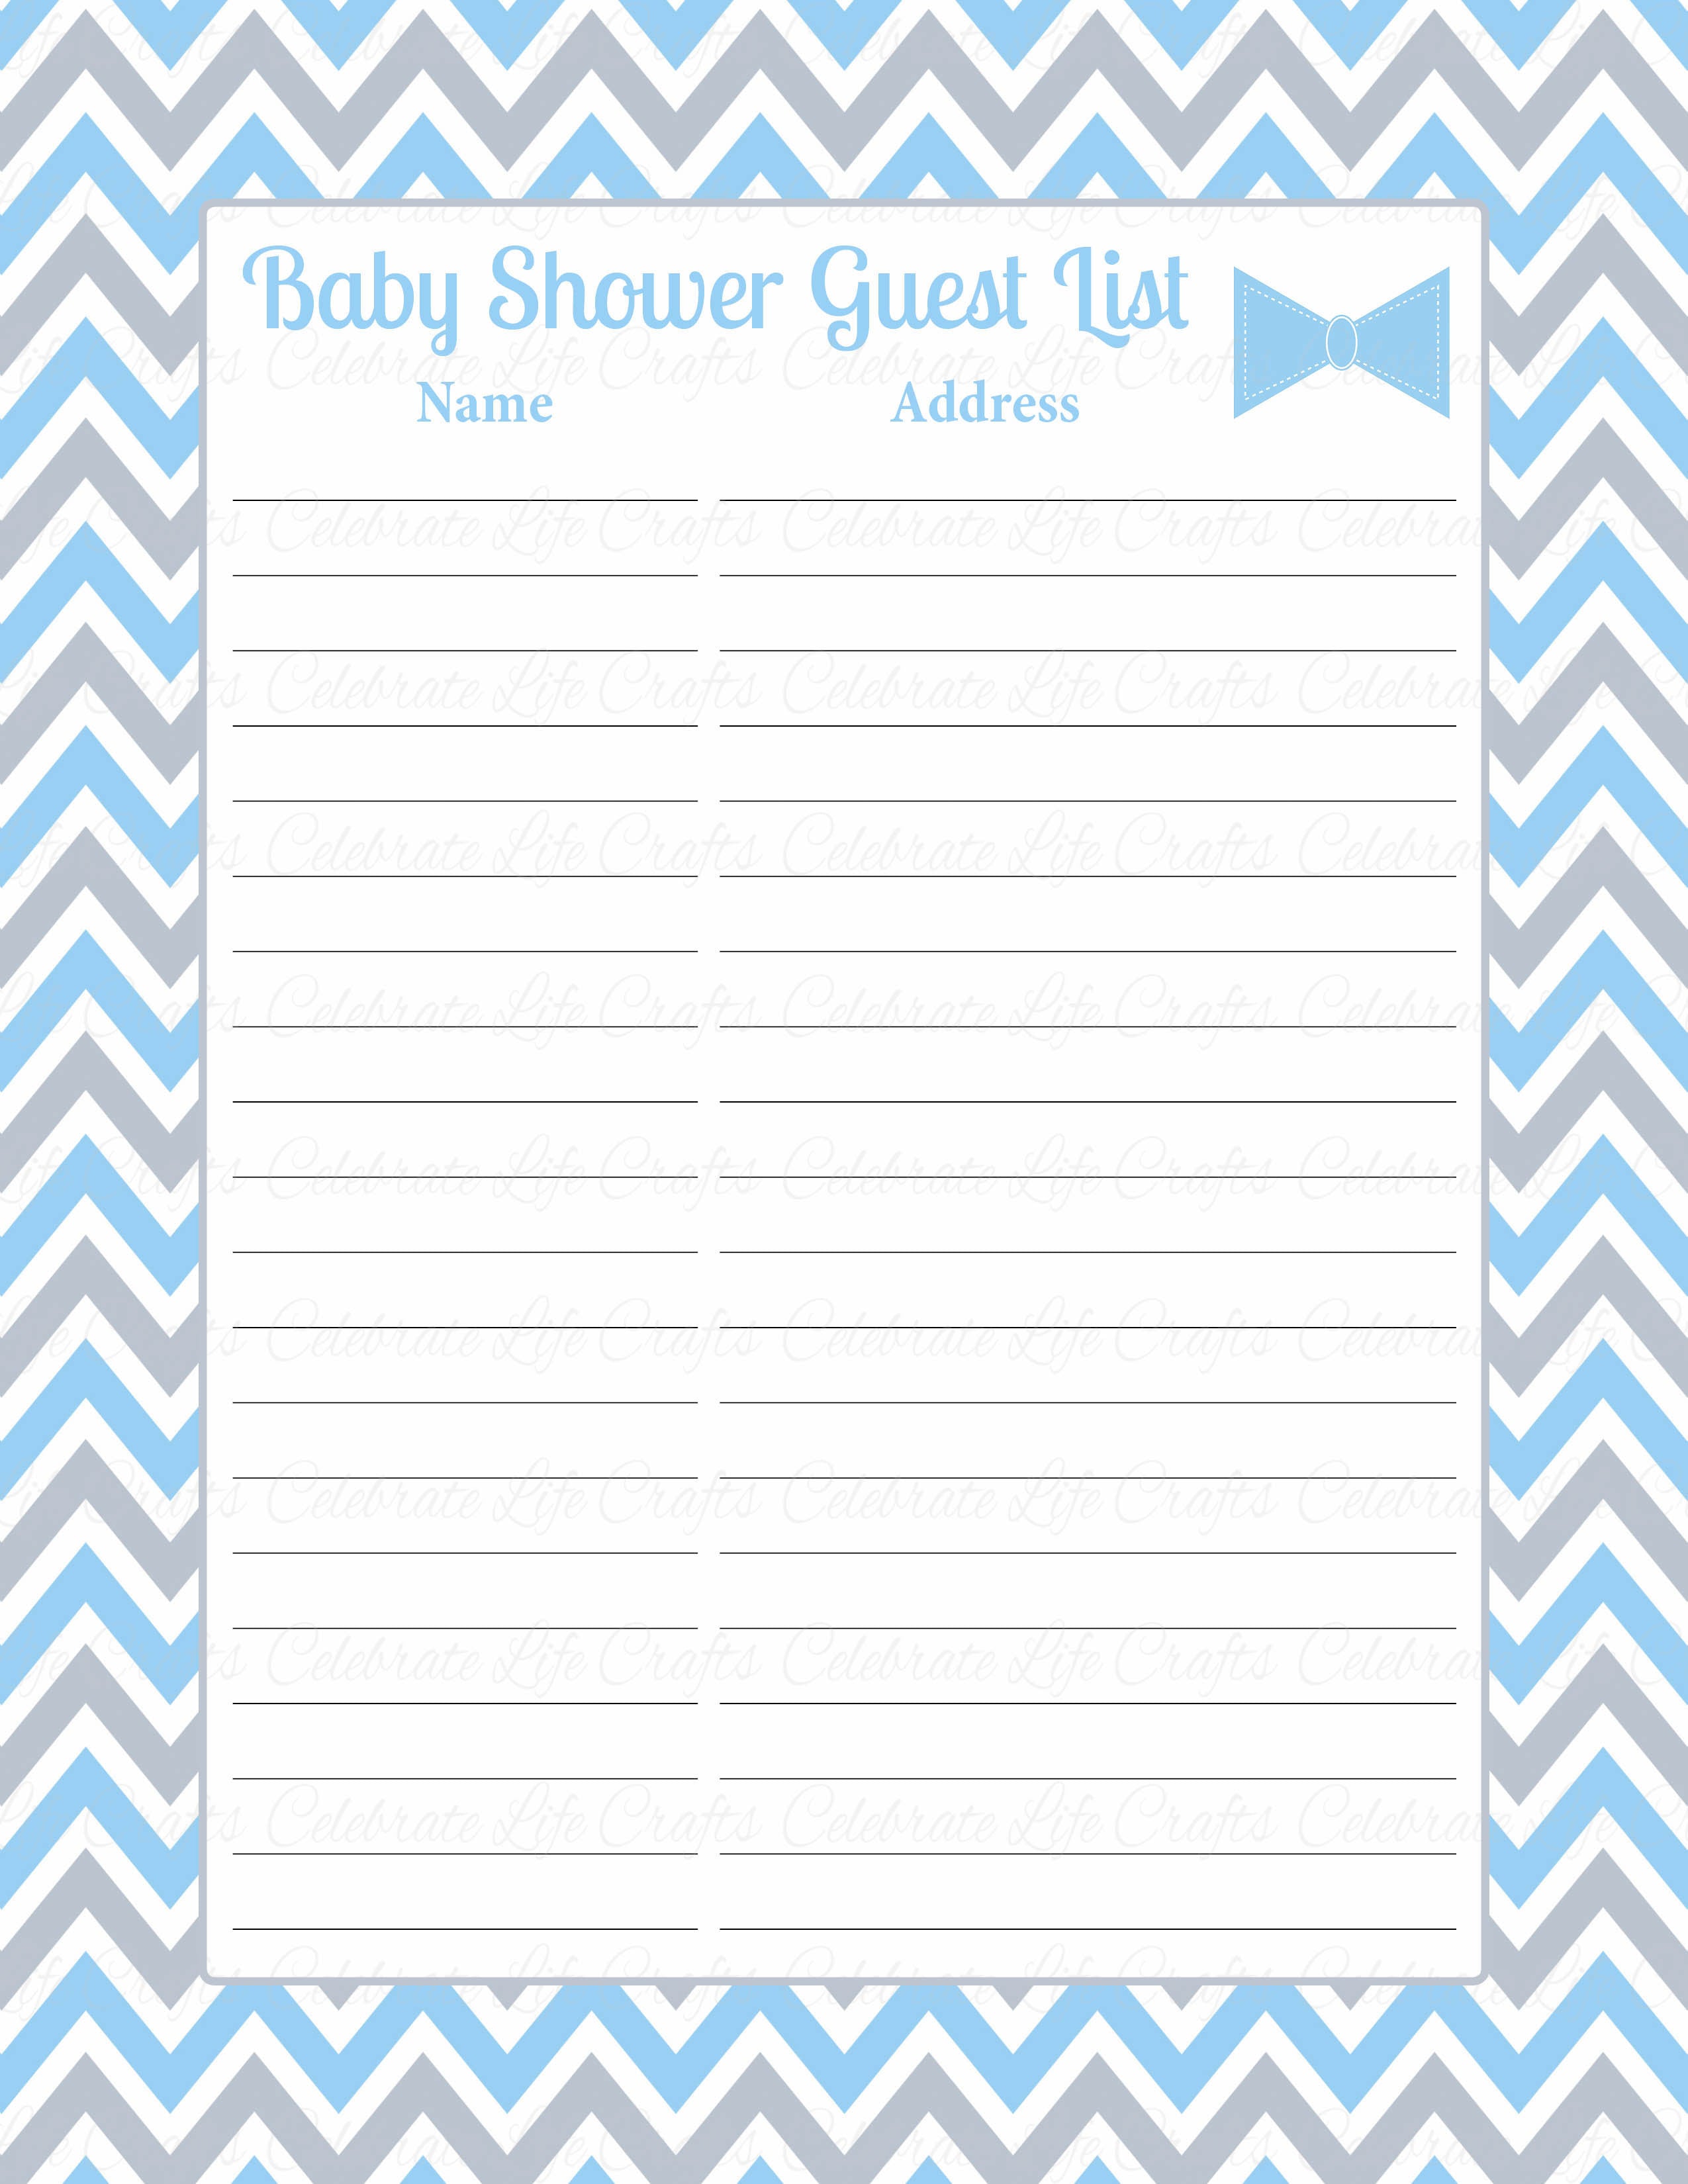 Baby Shower Guest List Set Little Man Baby Shower Theme for Baby Boy